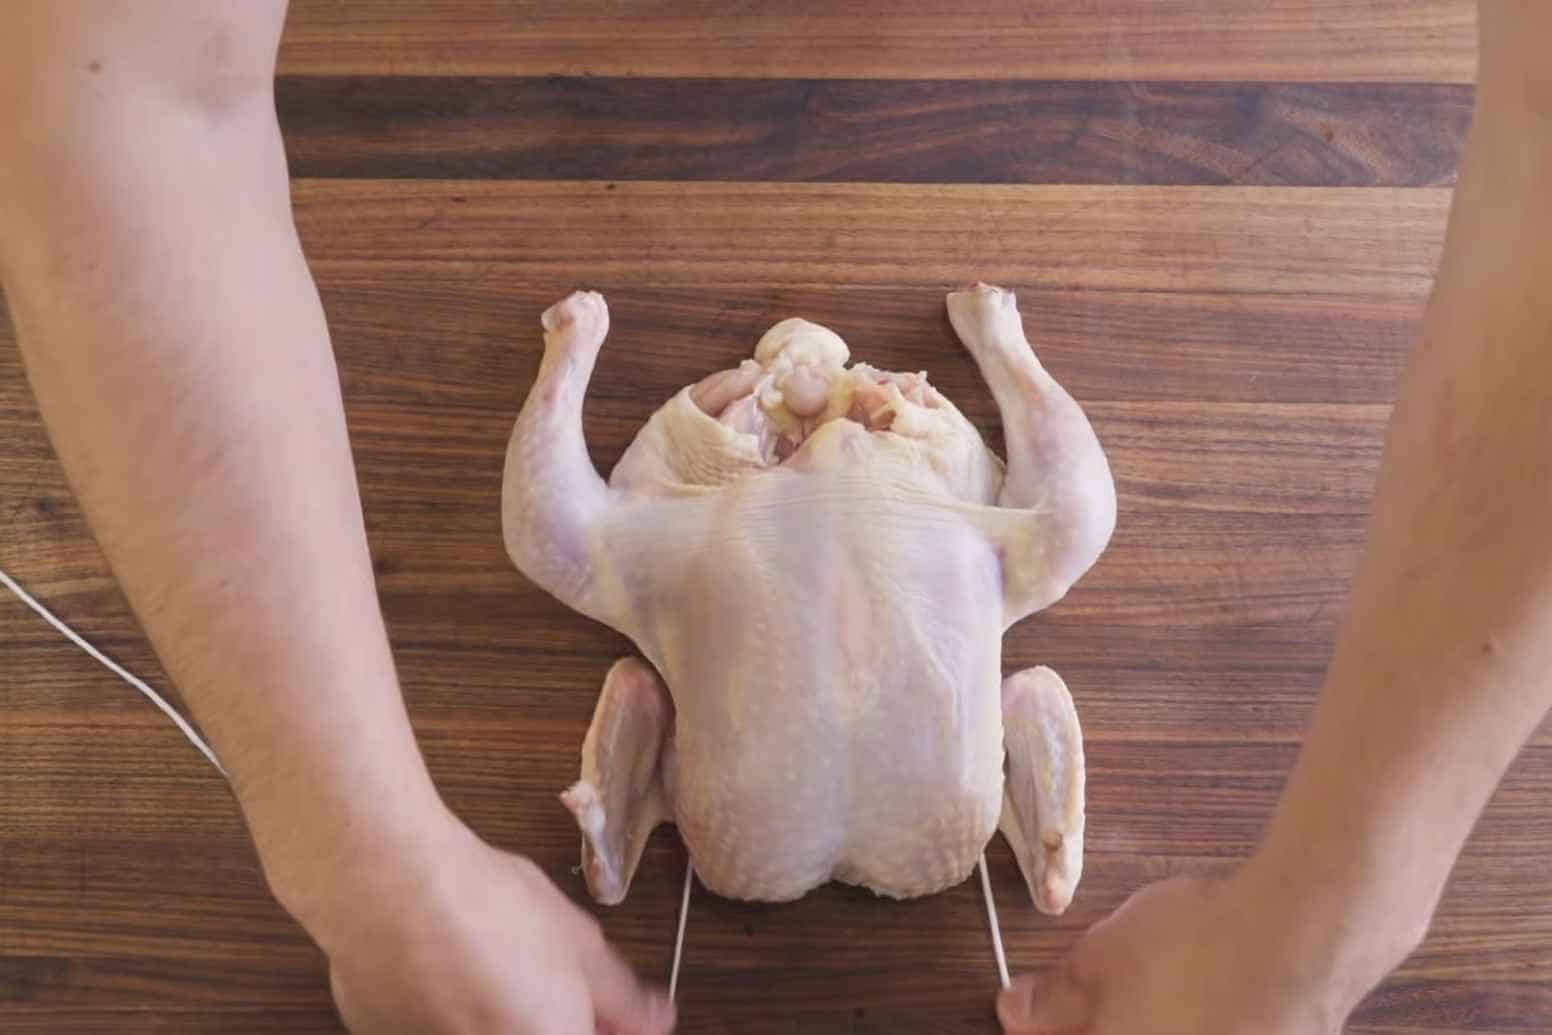 Place the Chicken Leg Up